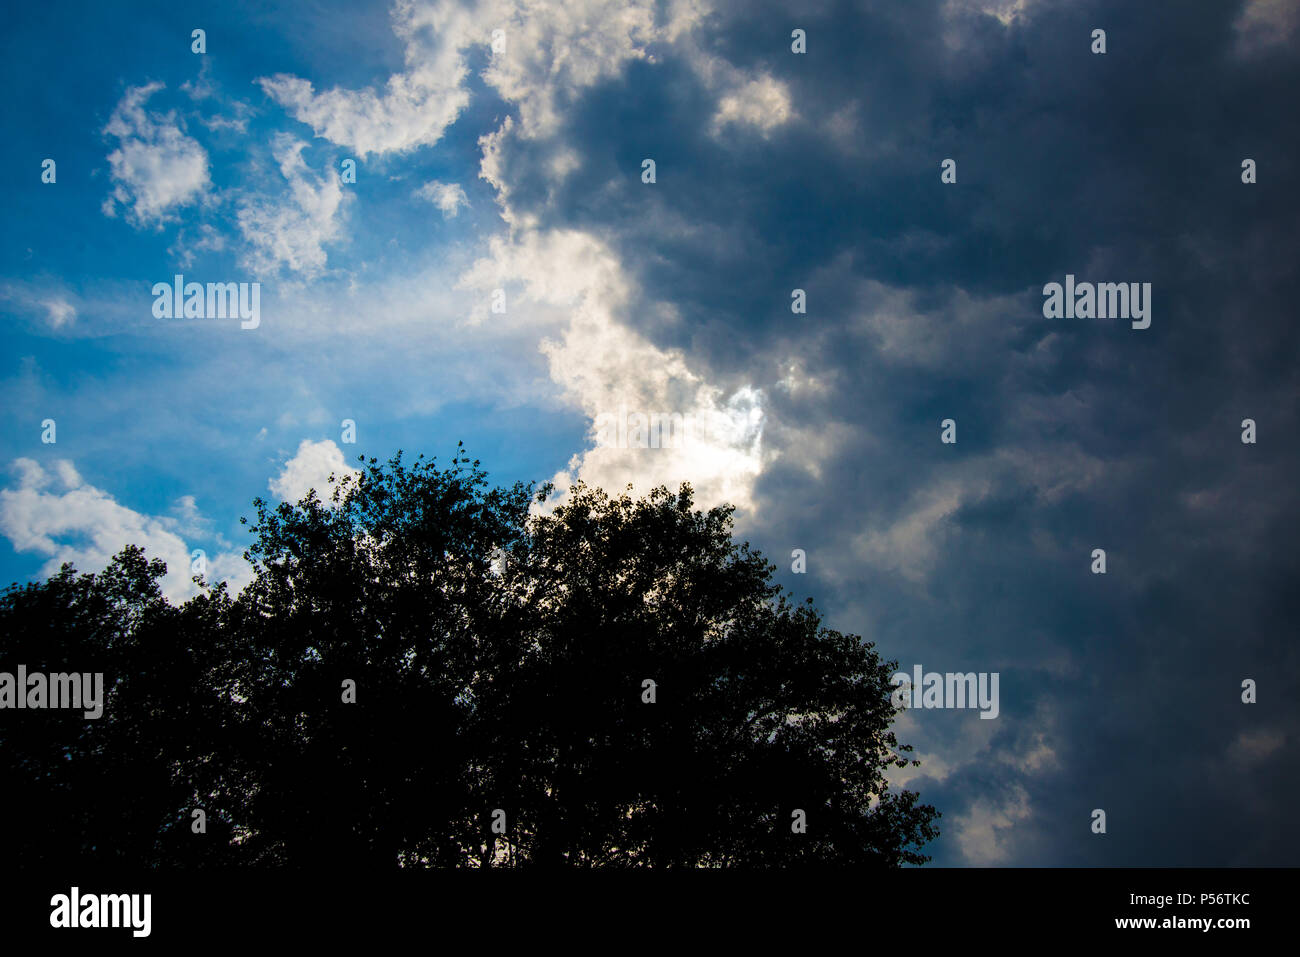 A sunny day with thunderclouds in the sky. In the foreground is a tree. Stock Photo